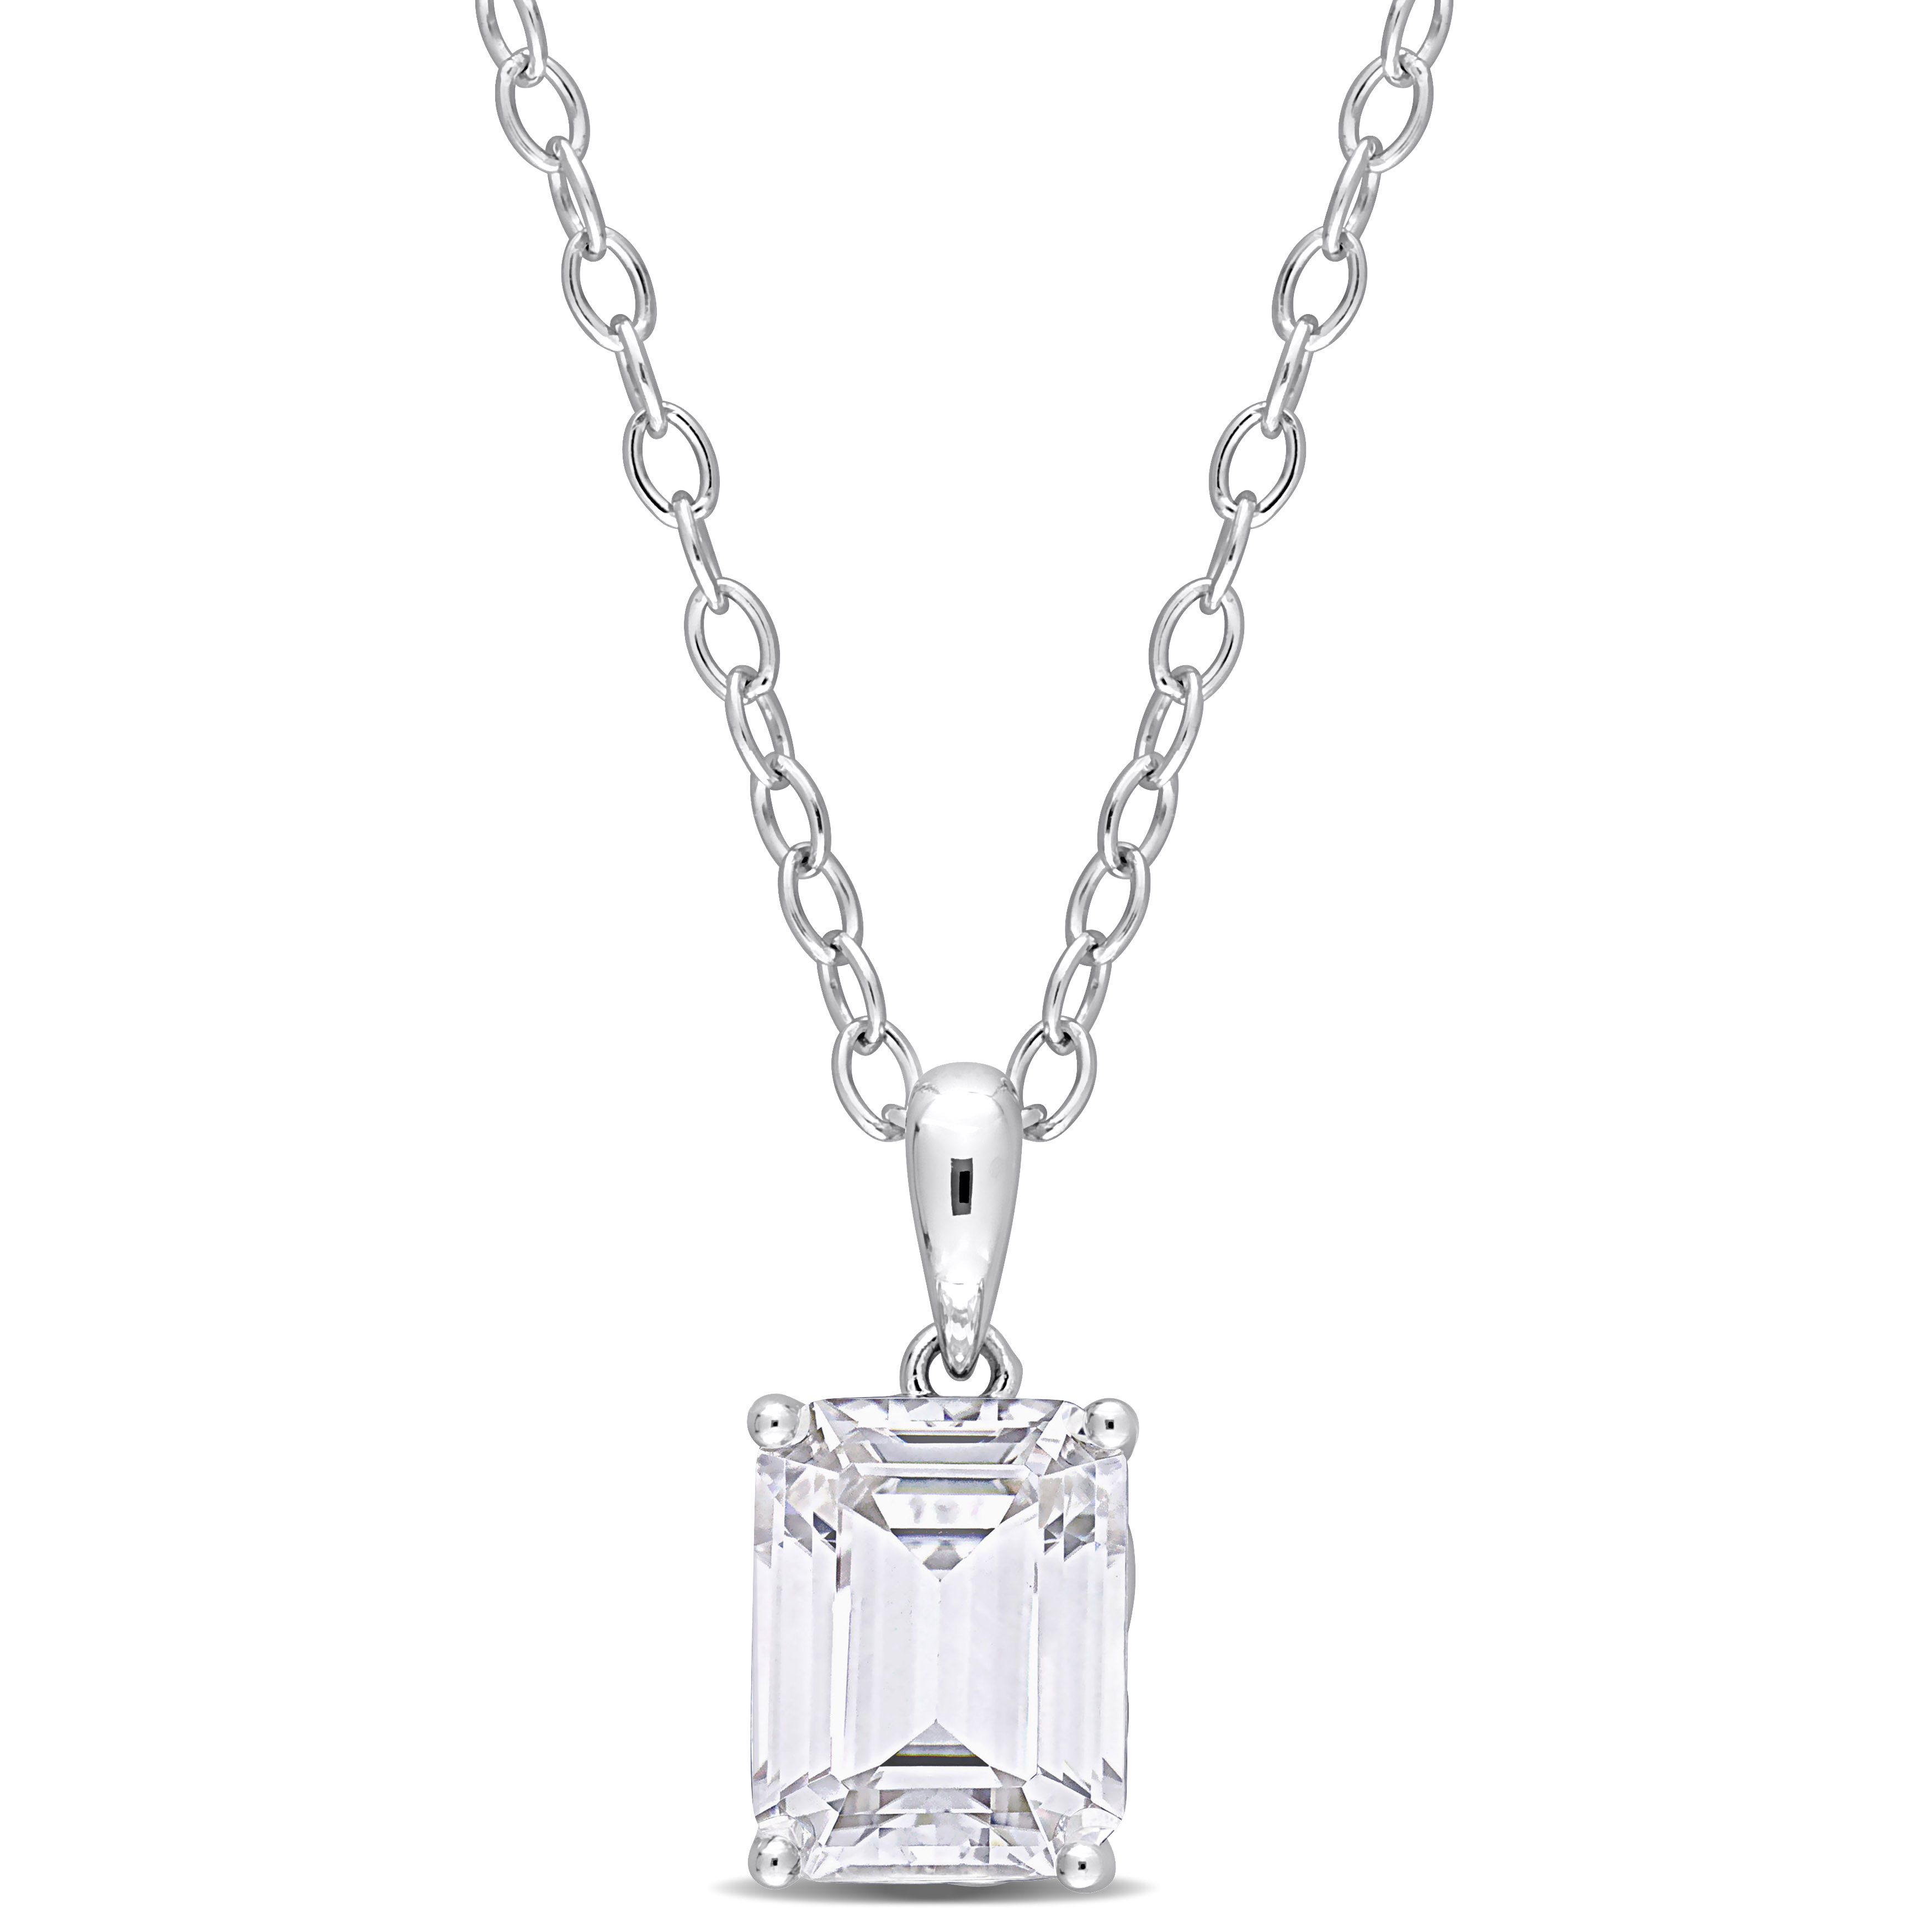 3 3/4 CT TGW Emerald Cut Created White Sapphire Solitaire Heart Design Pendant with Chain in Sterling Silver - 18 in.